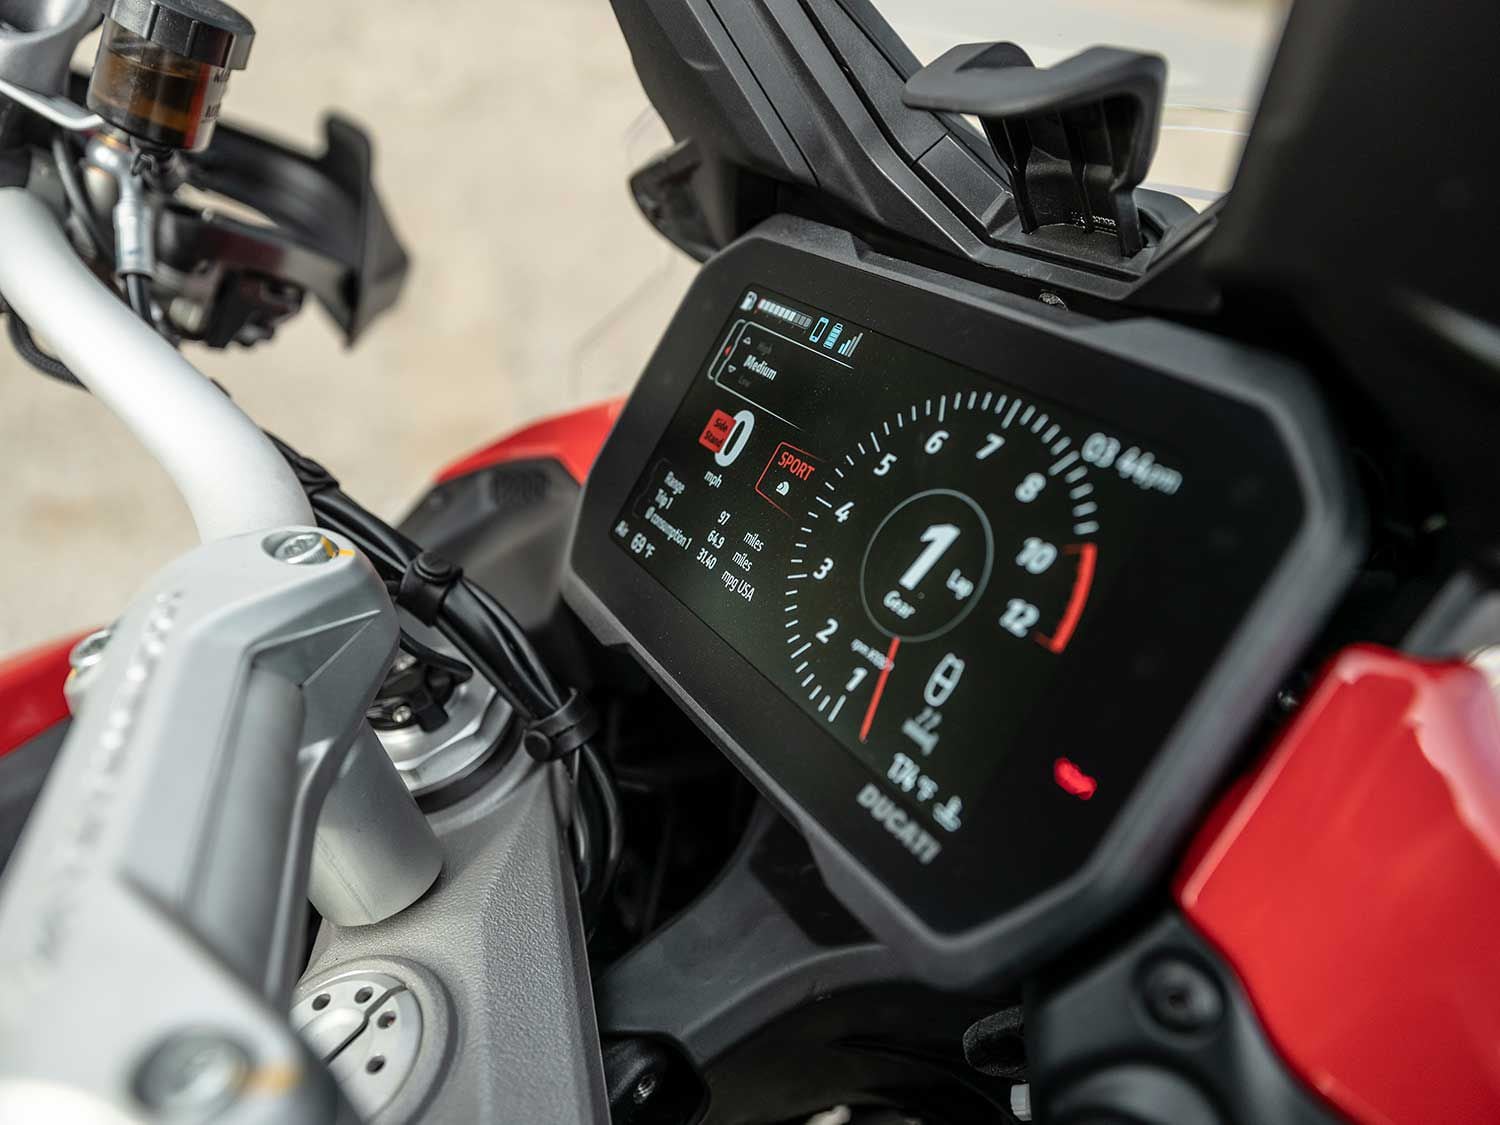 The Multistrada V4 S sources a bright 6.5-inch color TFT display. While we value its crisp fonts the layout and menu navigation could benefit from added intuitiveness.